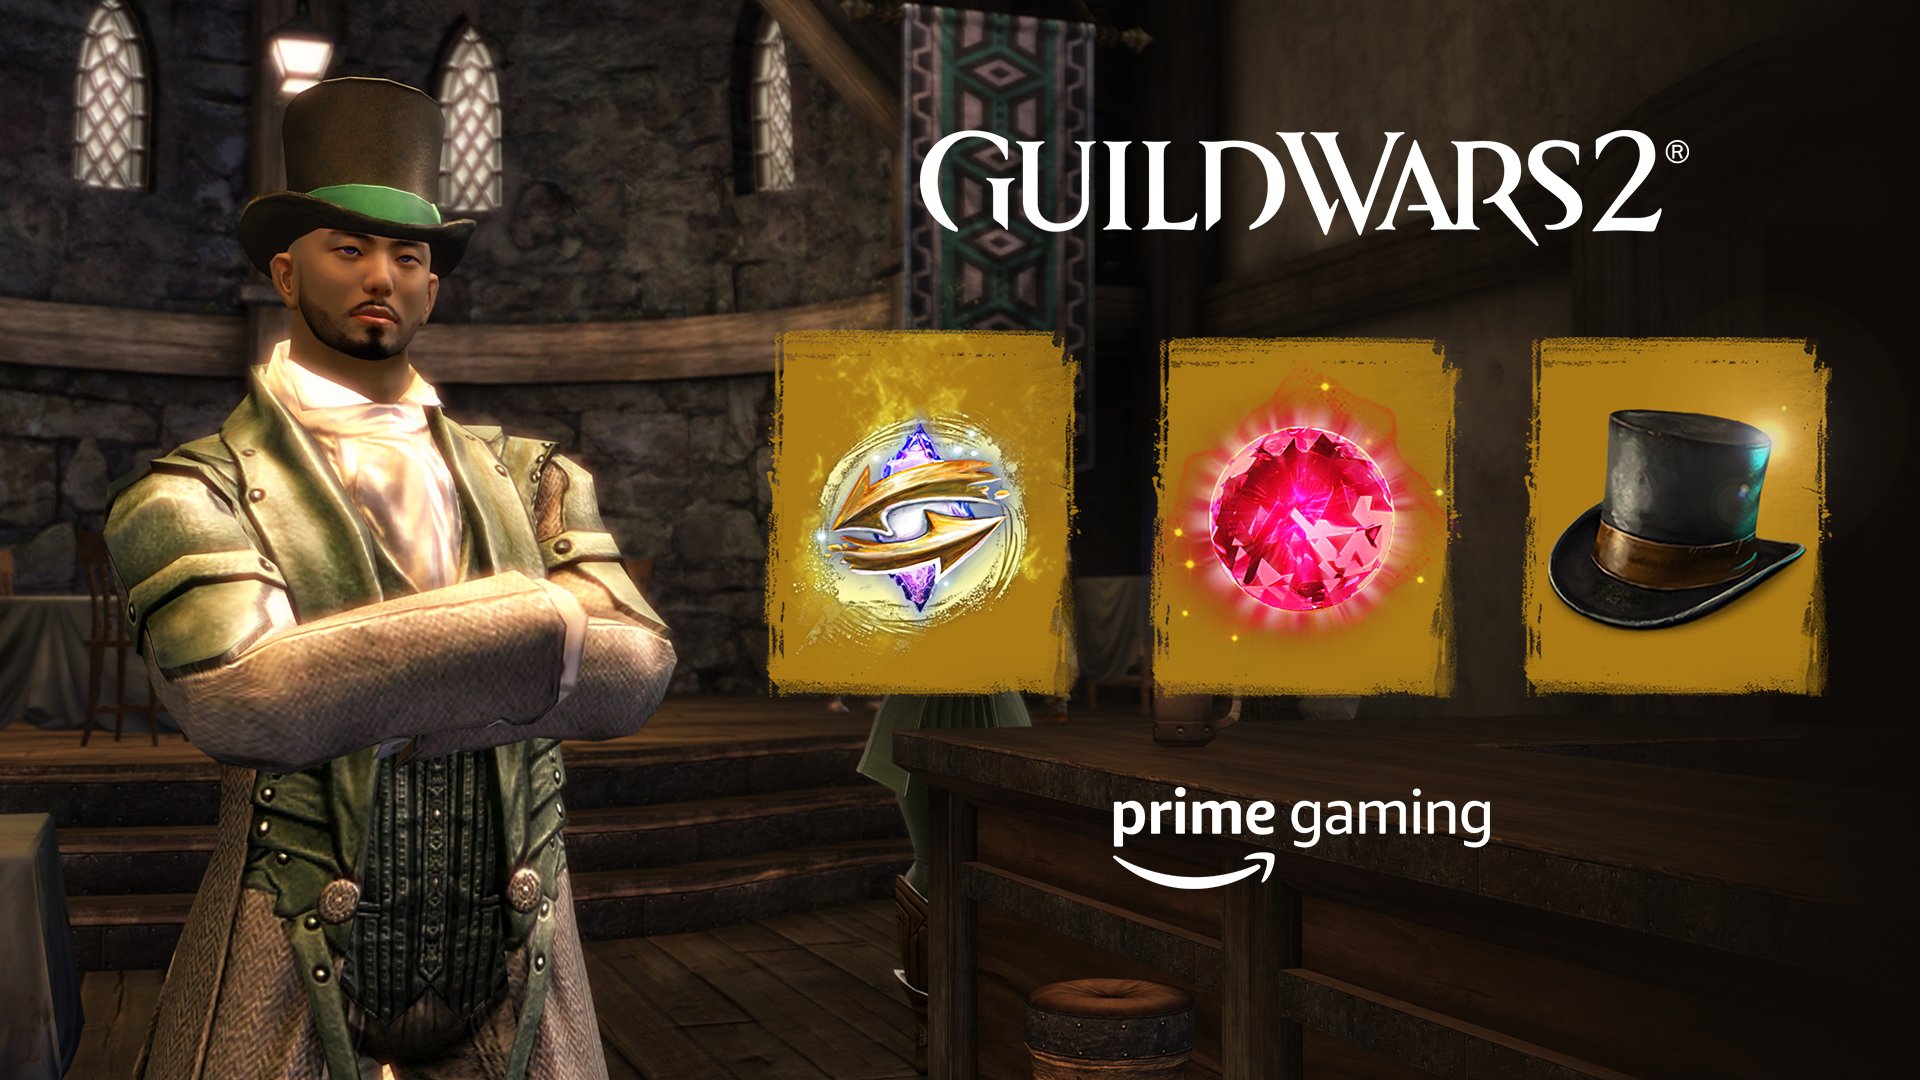 Guild Wars 2 on X: Last chance to claim your #GuildWars2